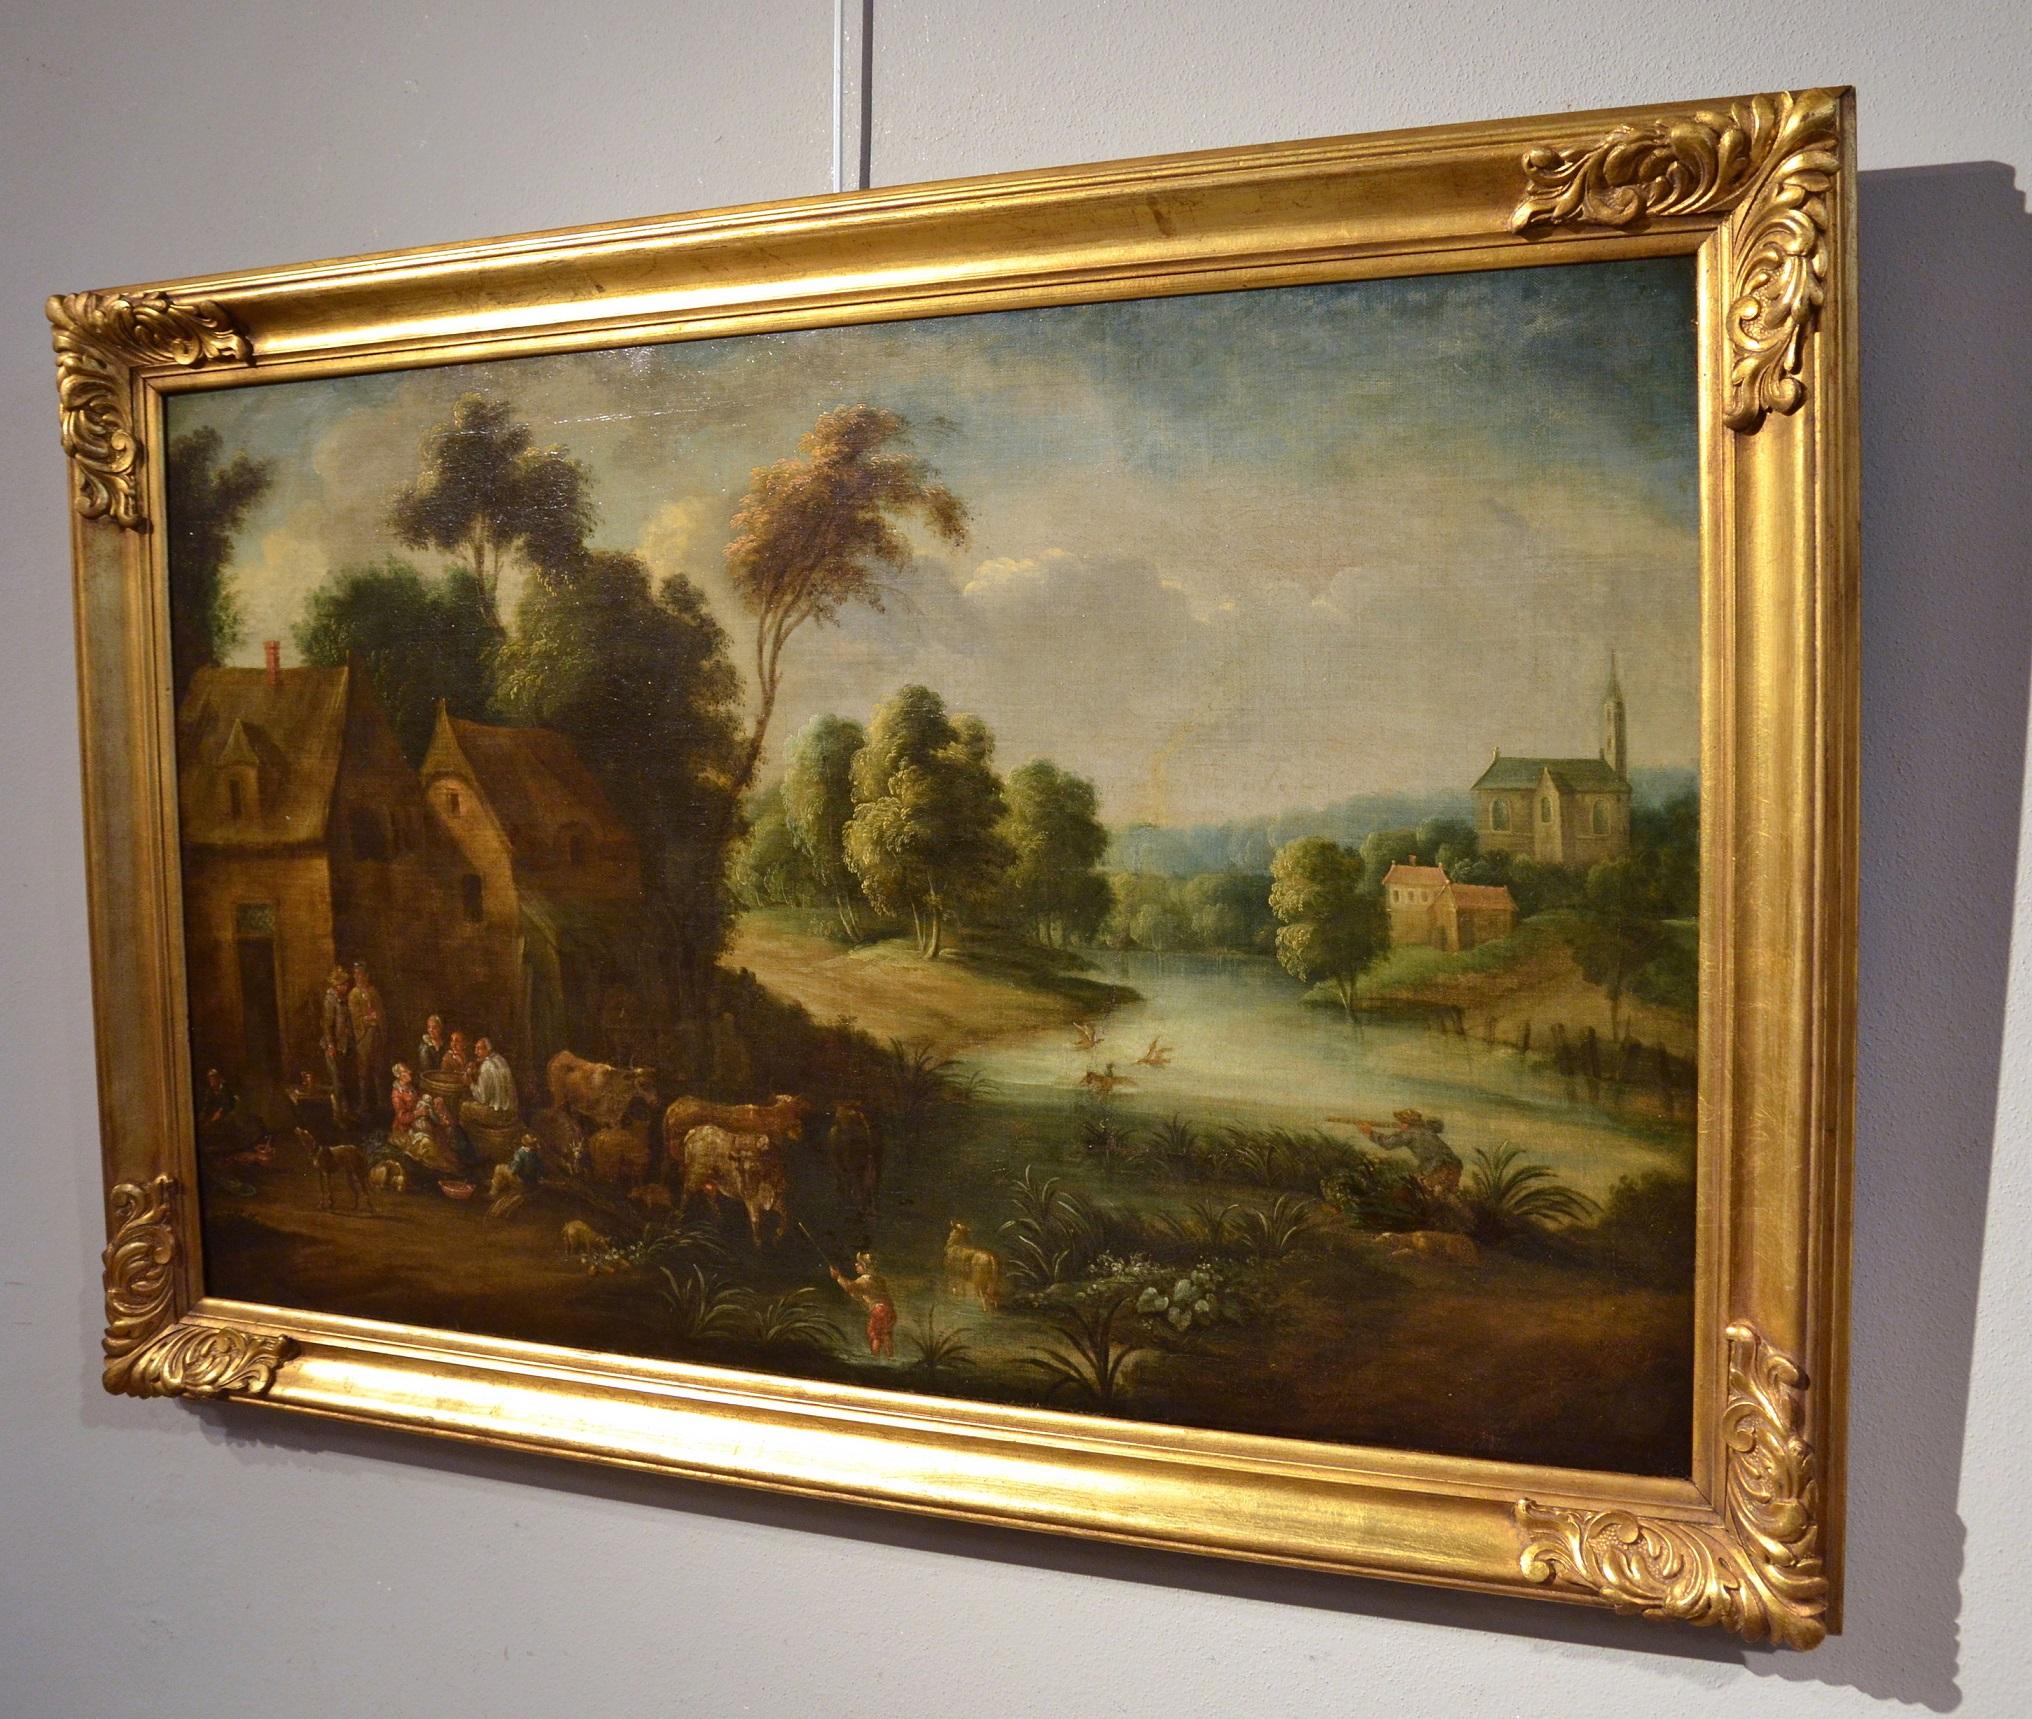 River landscape with popular life scene
Oil painting on canvas
62 x 98
Framed 74 x 110 cm.

We present this vast and harmonious composition, where a characteristic river landscape acts as a stage for an exquisite extract of popular life, set in a